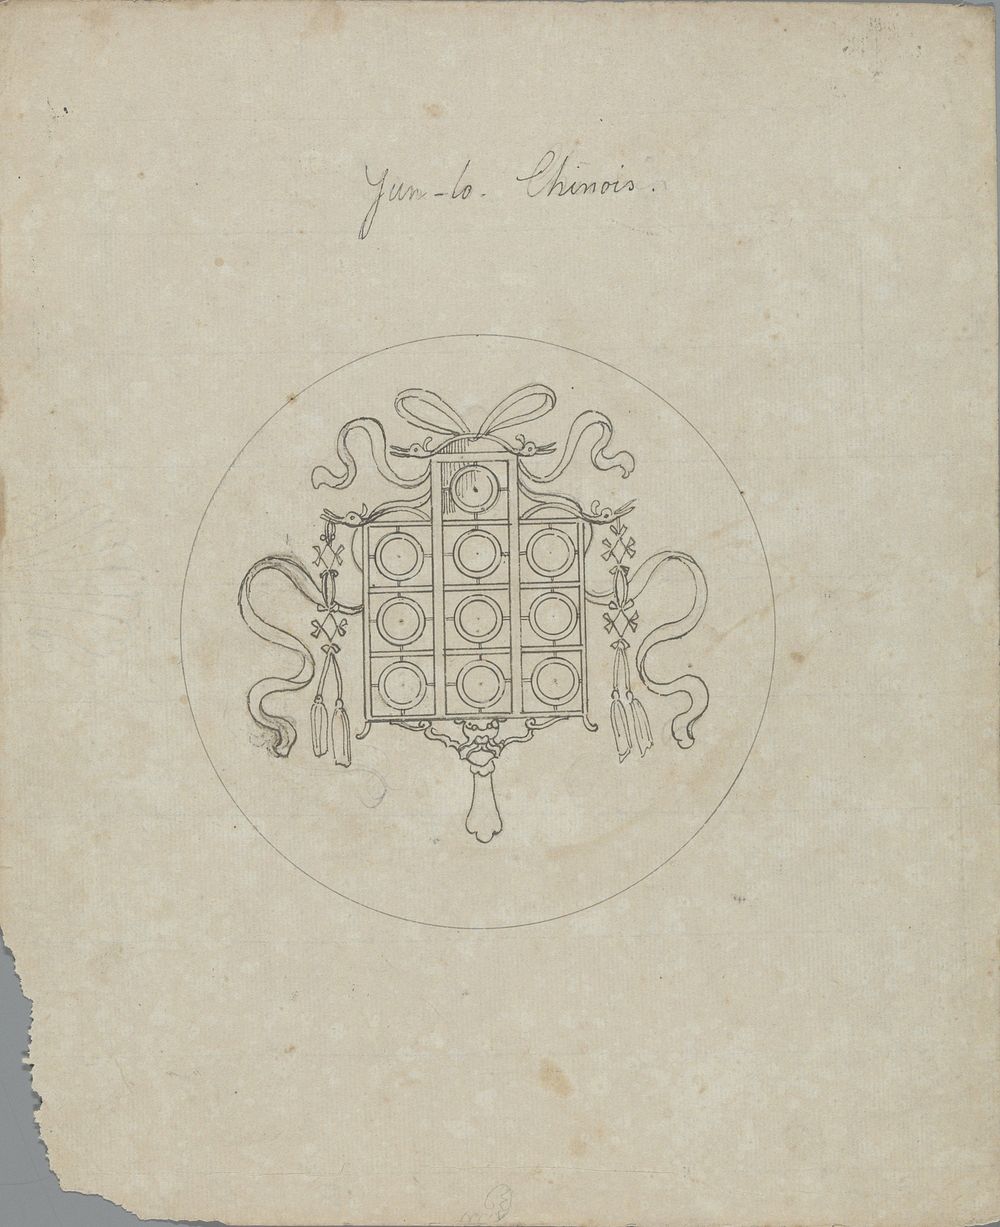 Yun-lo. Chinois (in or before 1828) by Pierre Félix van Doren